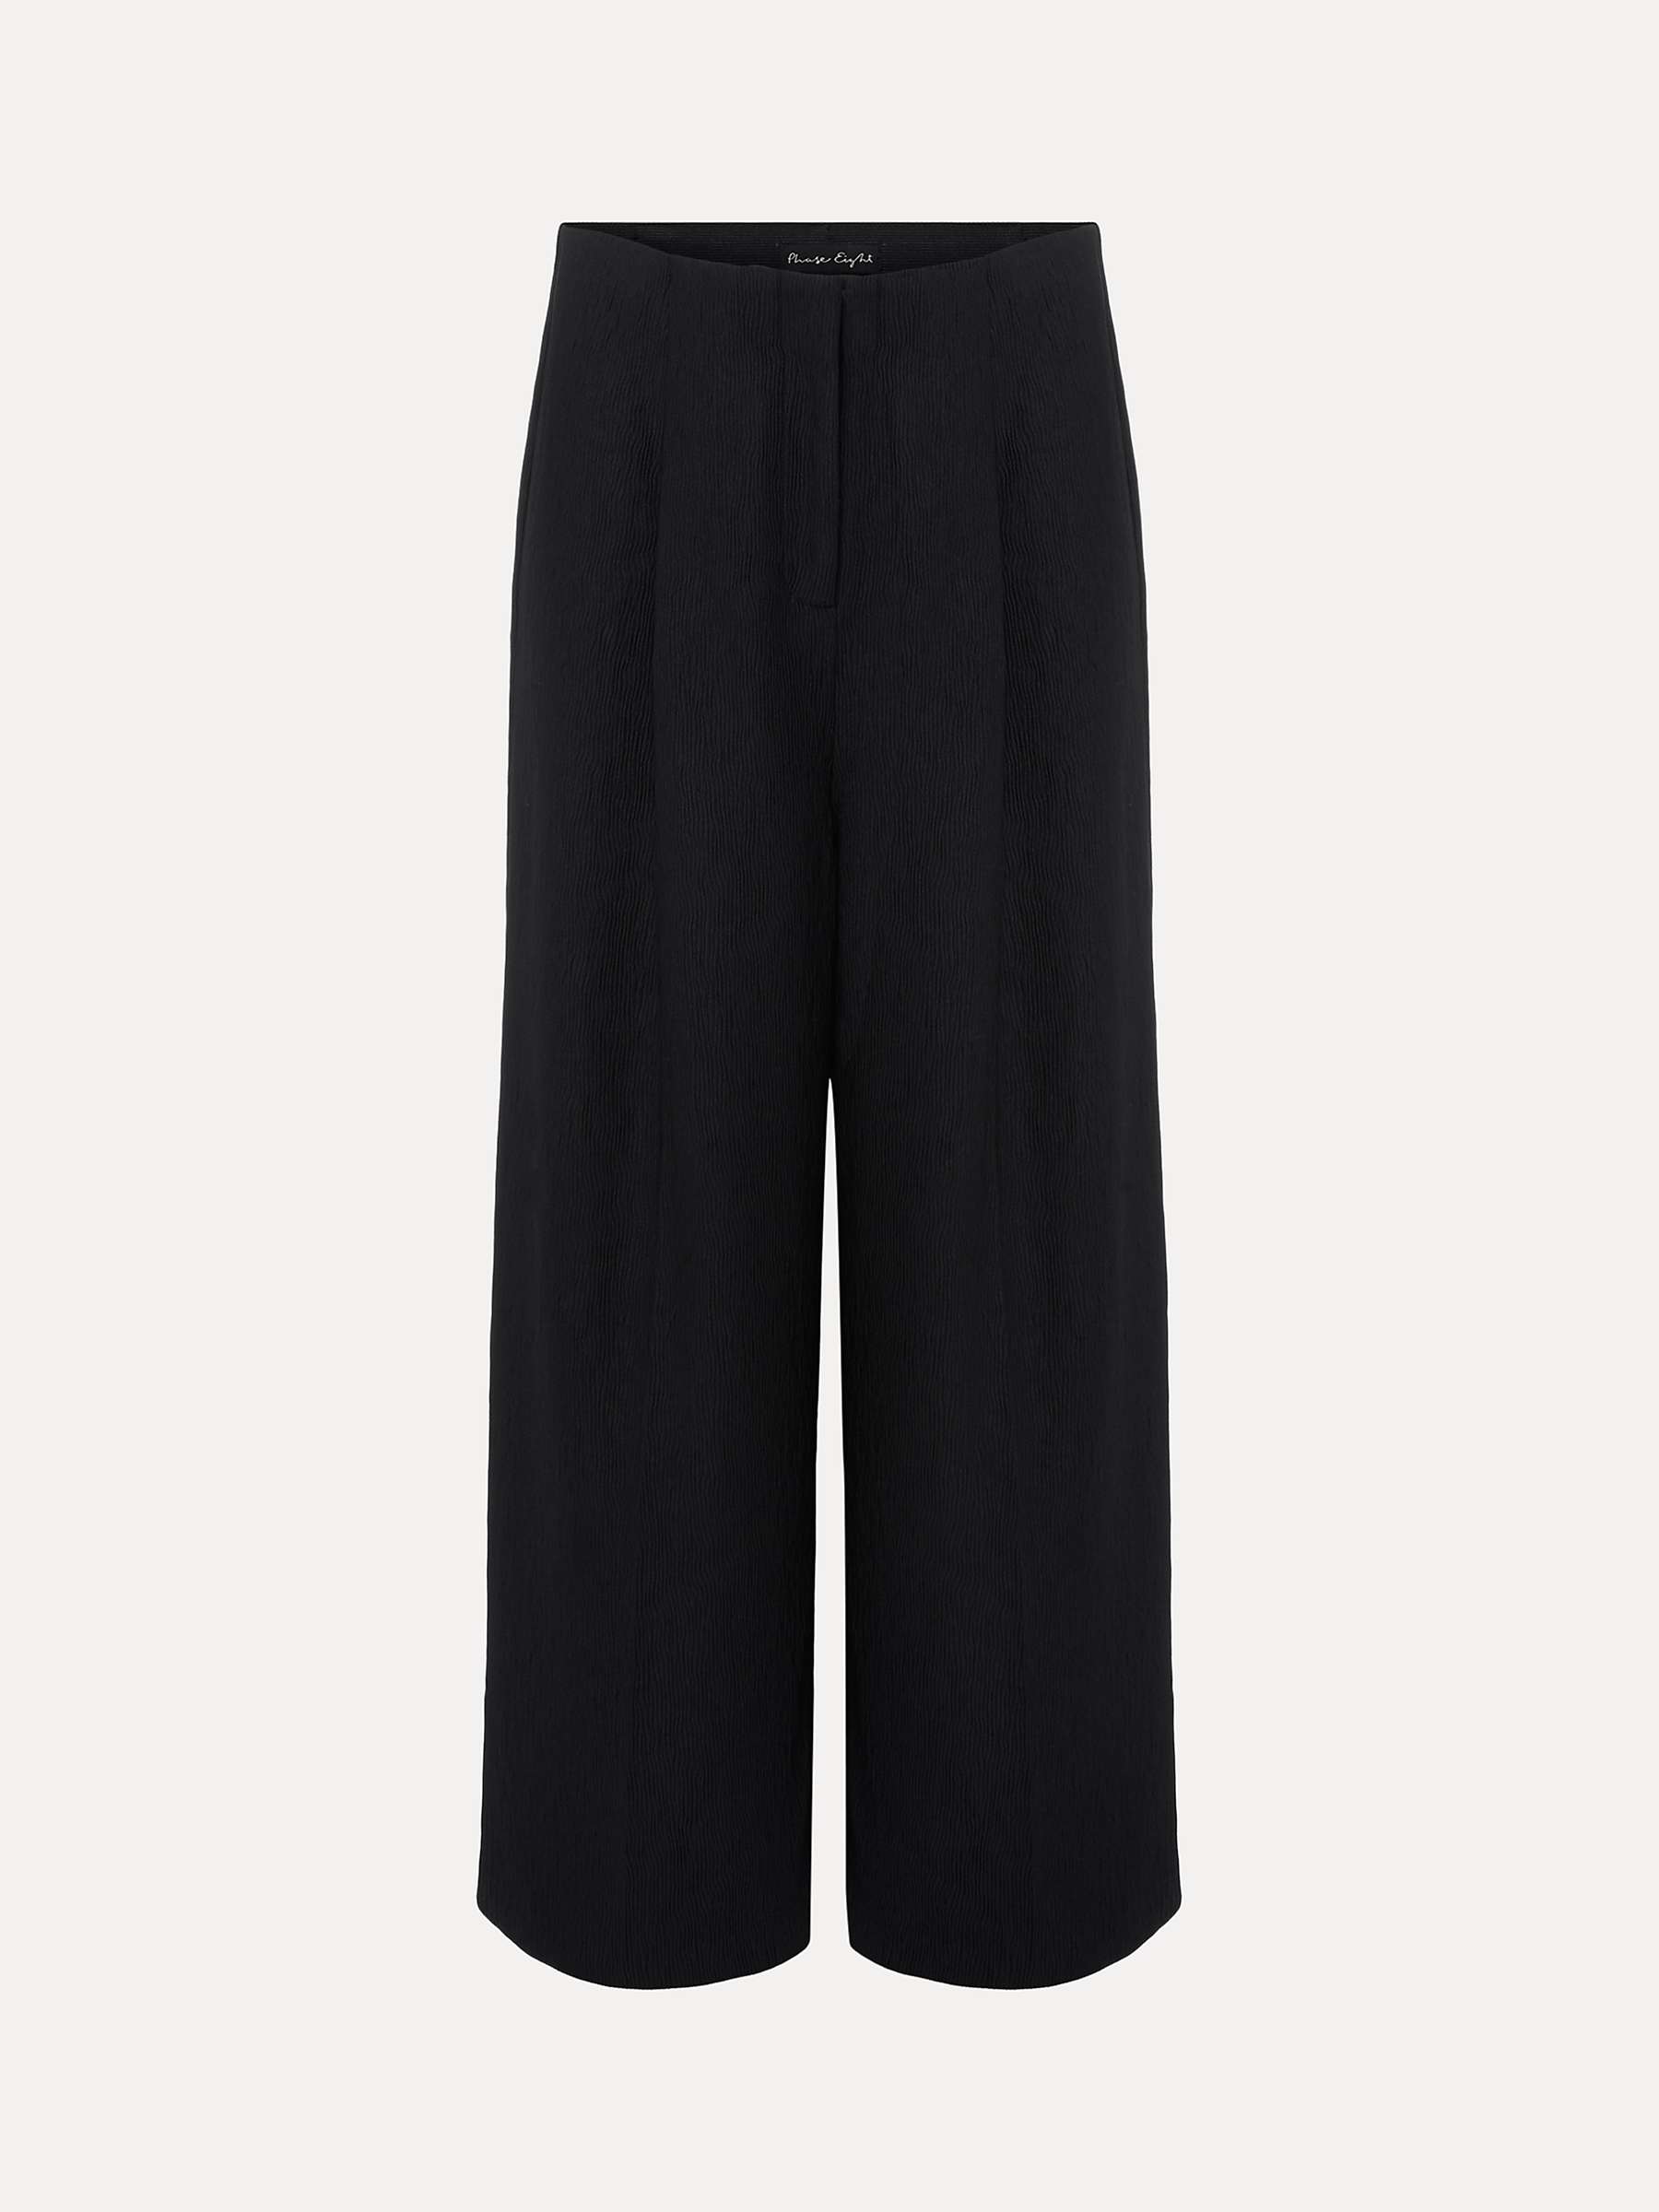 Phase Eight Audrea Plain Tailored Culottes, Black at John Lewis & Partners